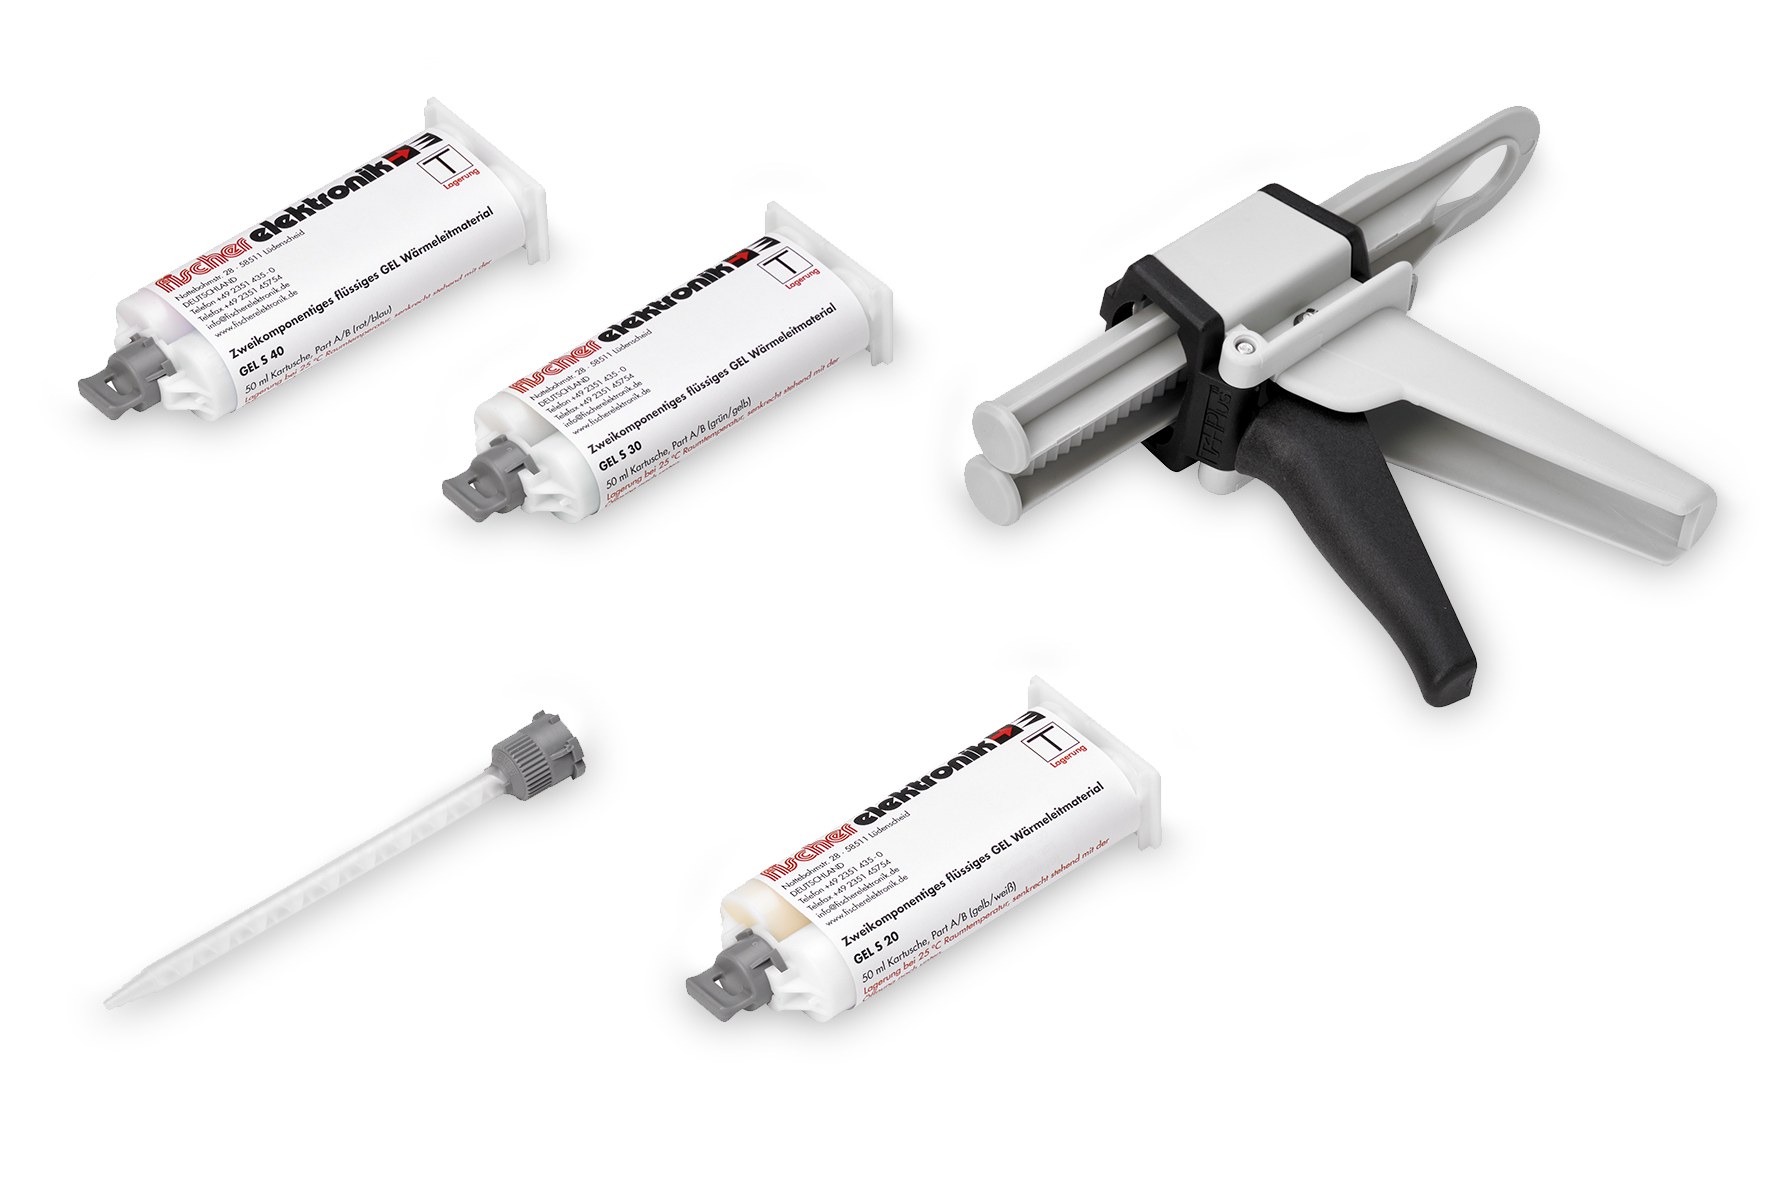 Thermaly conductive adhesive from FISCHER ELEKTRONIK